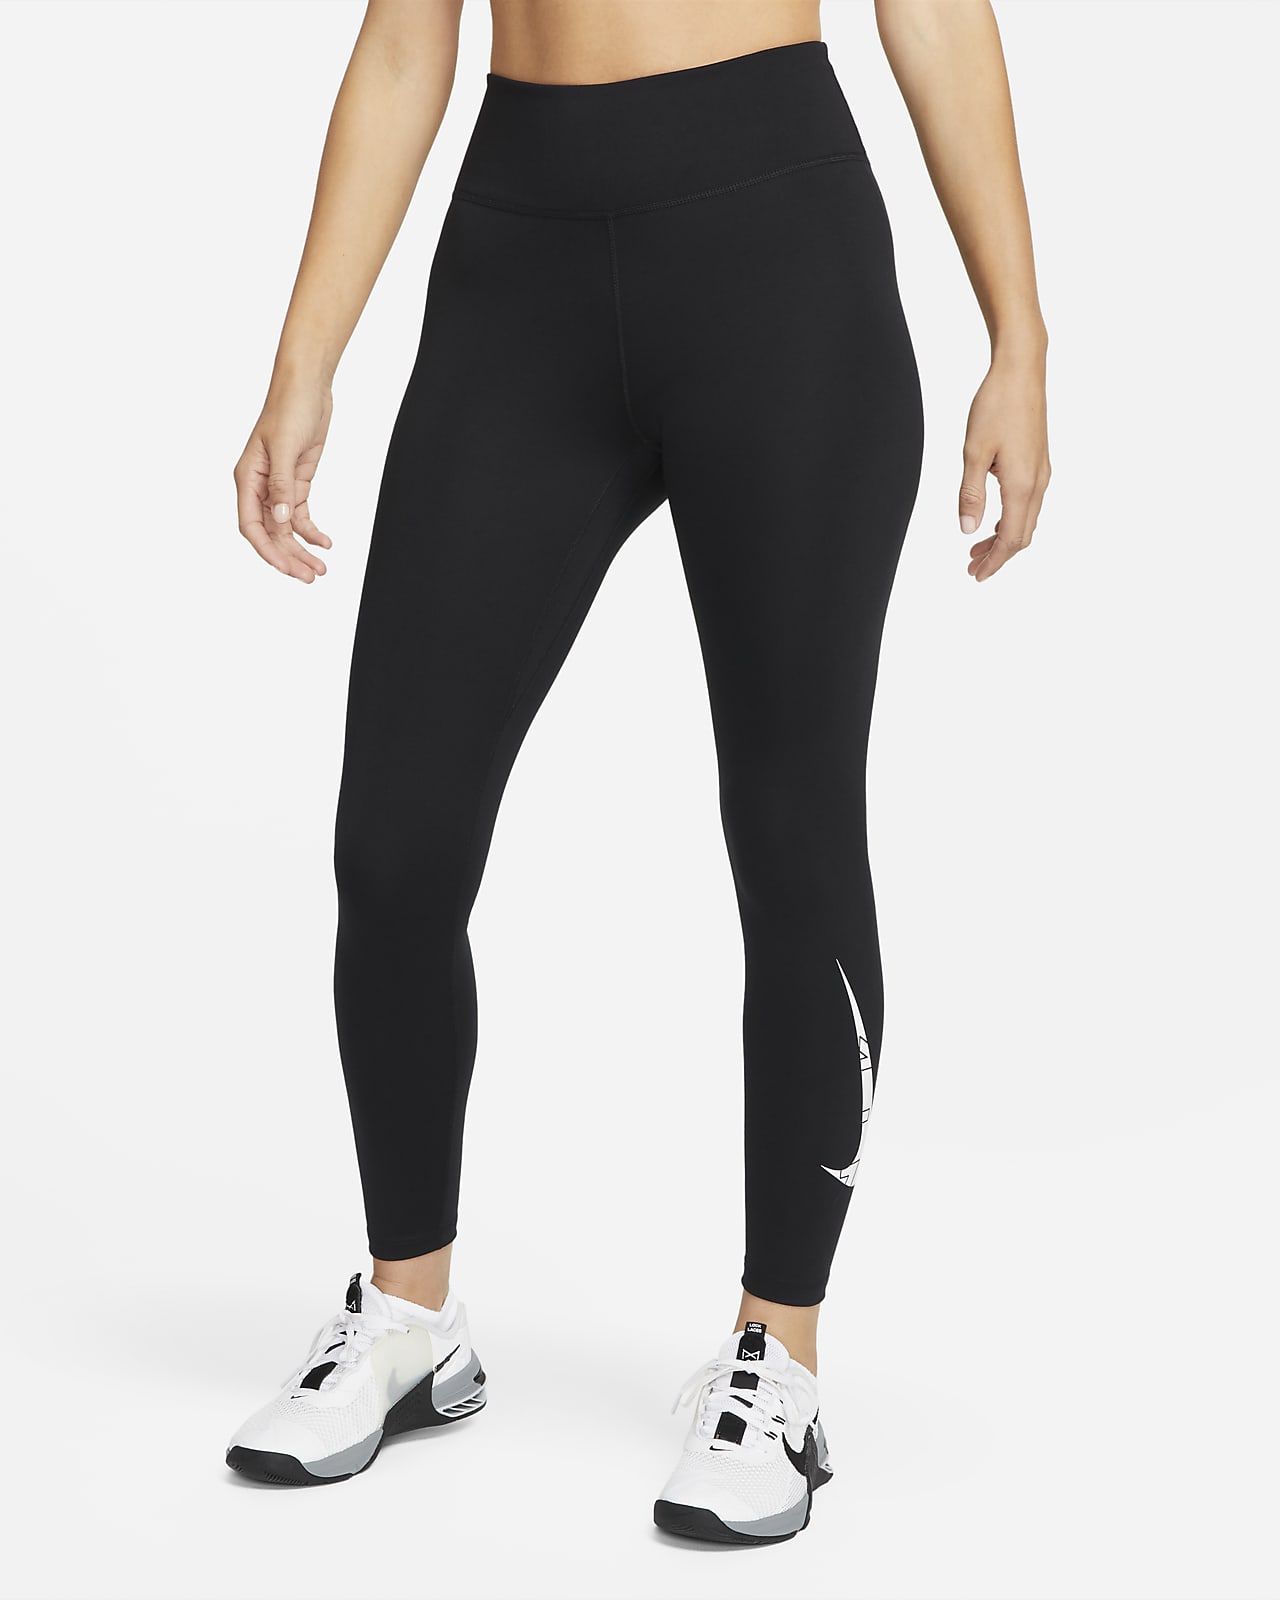 nike one training tights